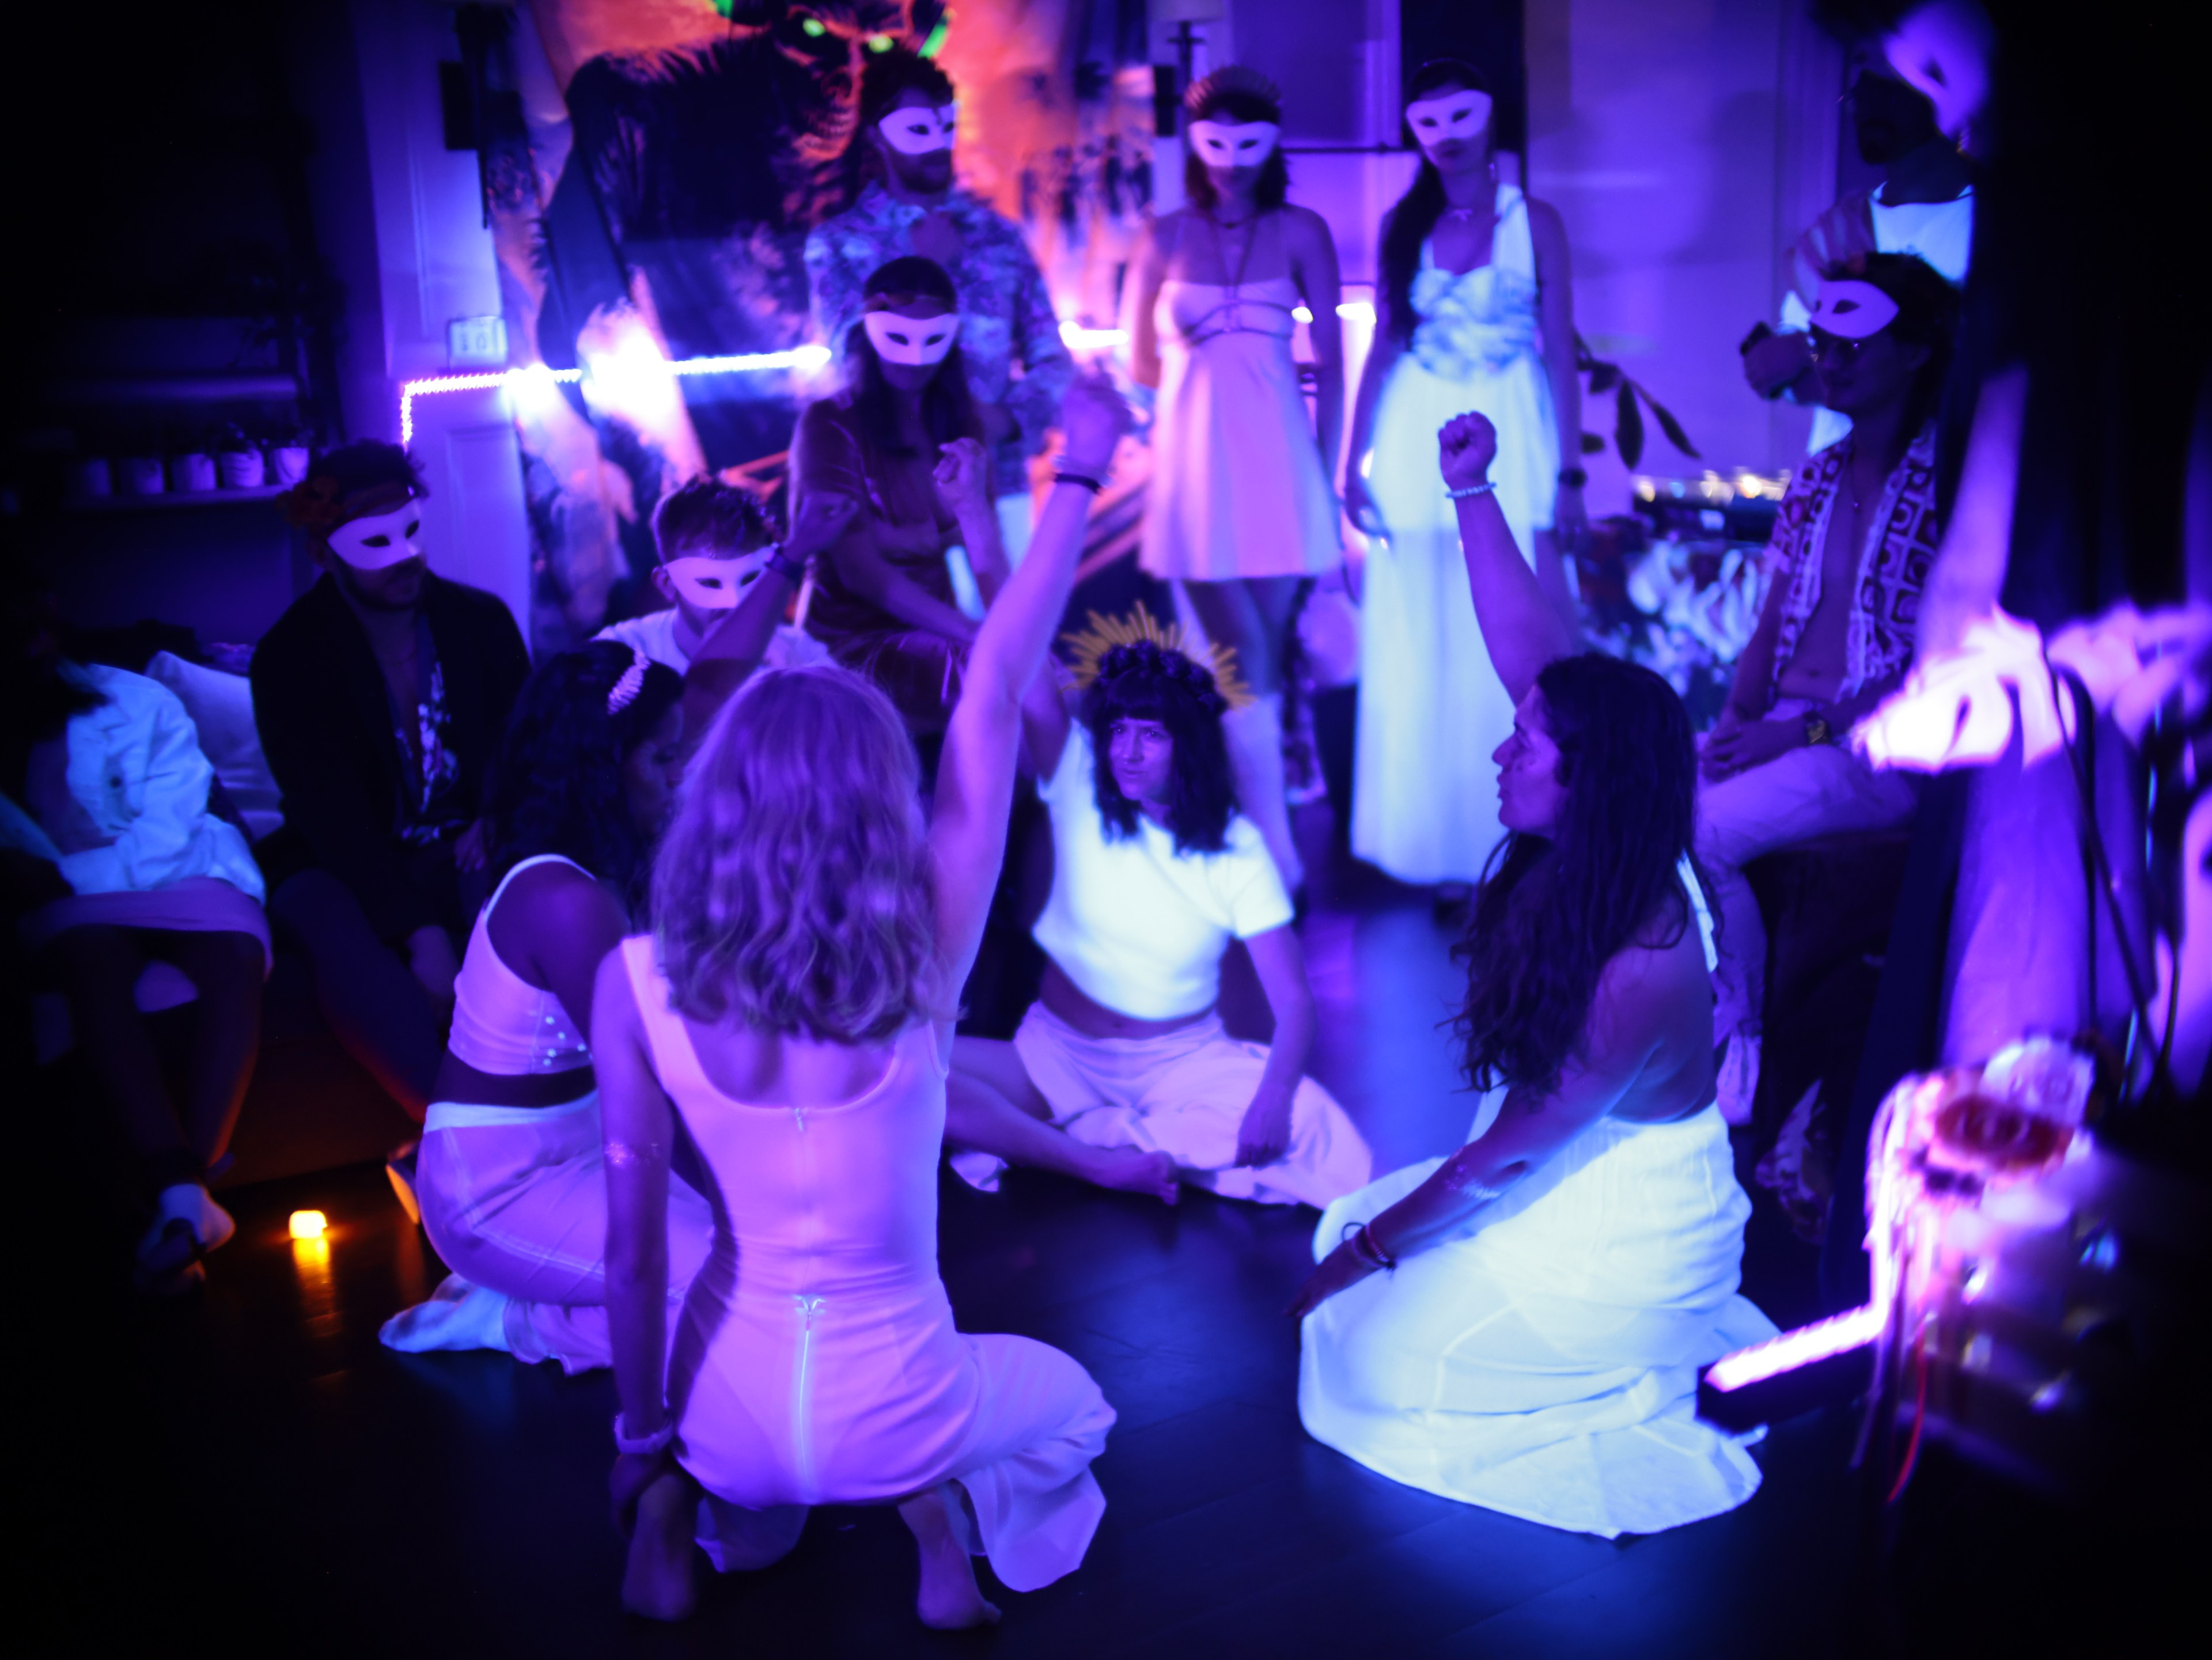 People in a dimly lit room with masks sit in a circle with two women in the center, creating a mysterious vibe.